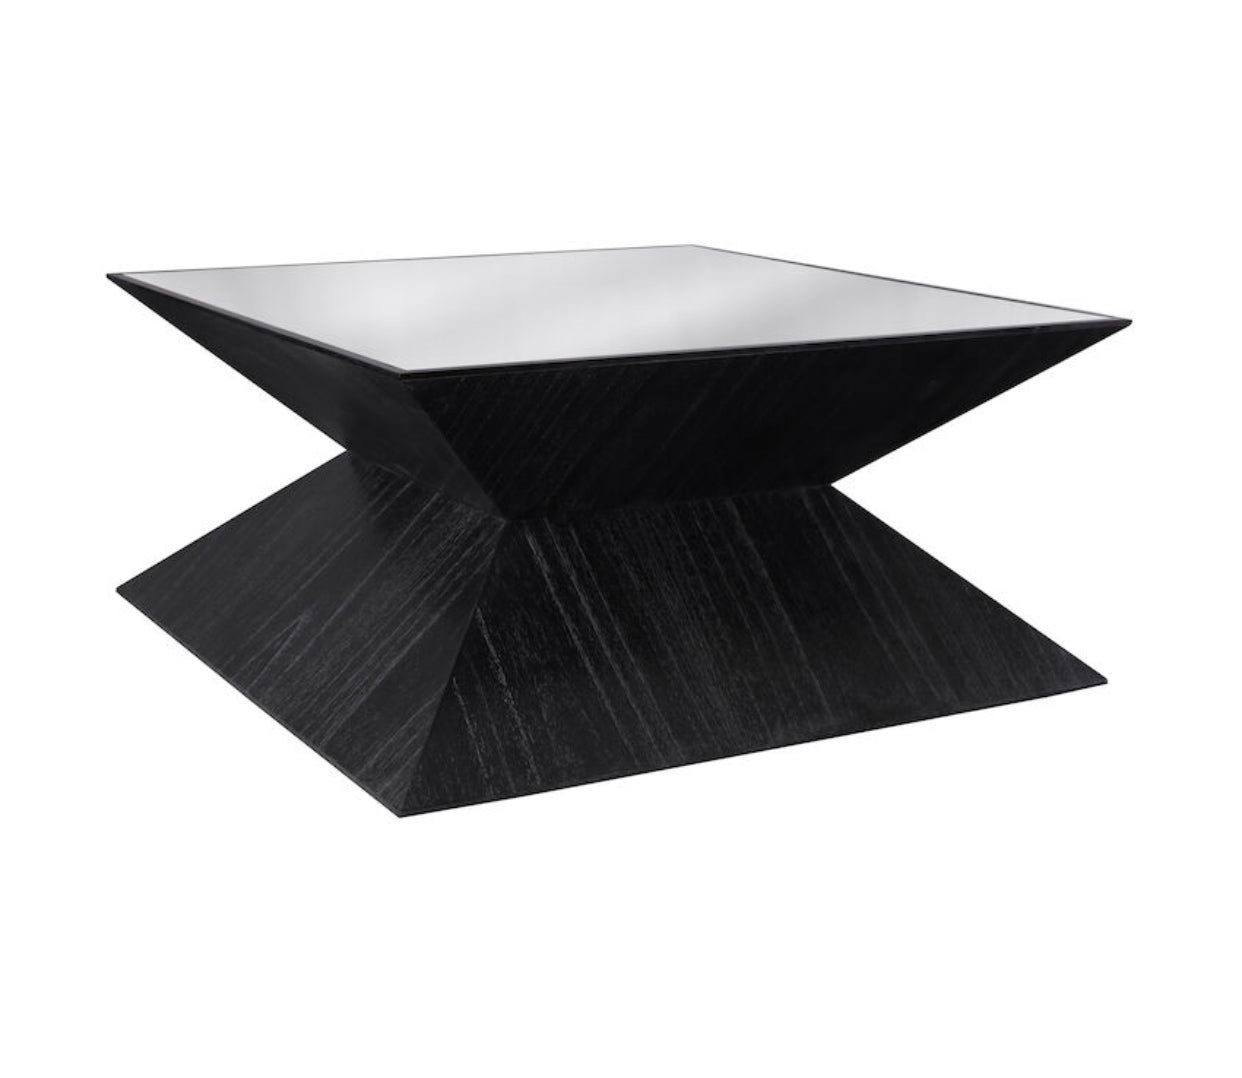 The Checkmate Coffee Table is a modern black square wood table with a tempered glass top. A marble laminate shelf under the glass provides a display area, and the black finish highlights the beauty of the wood grain. The table's sides are notched and faceted for a bit of sculptural interest. Item Width38 Item Depth38 Item Height18 Item Weight88